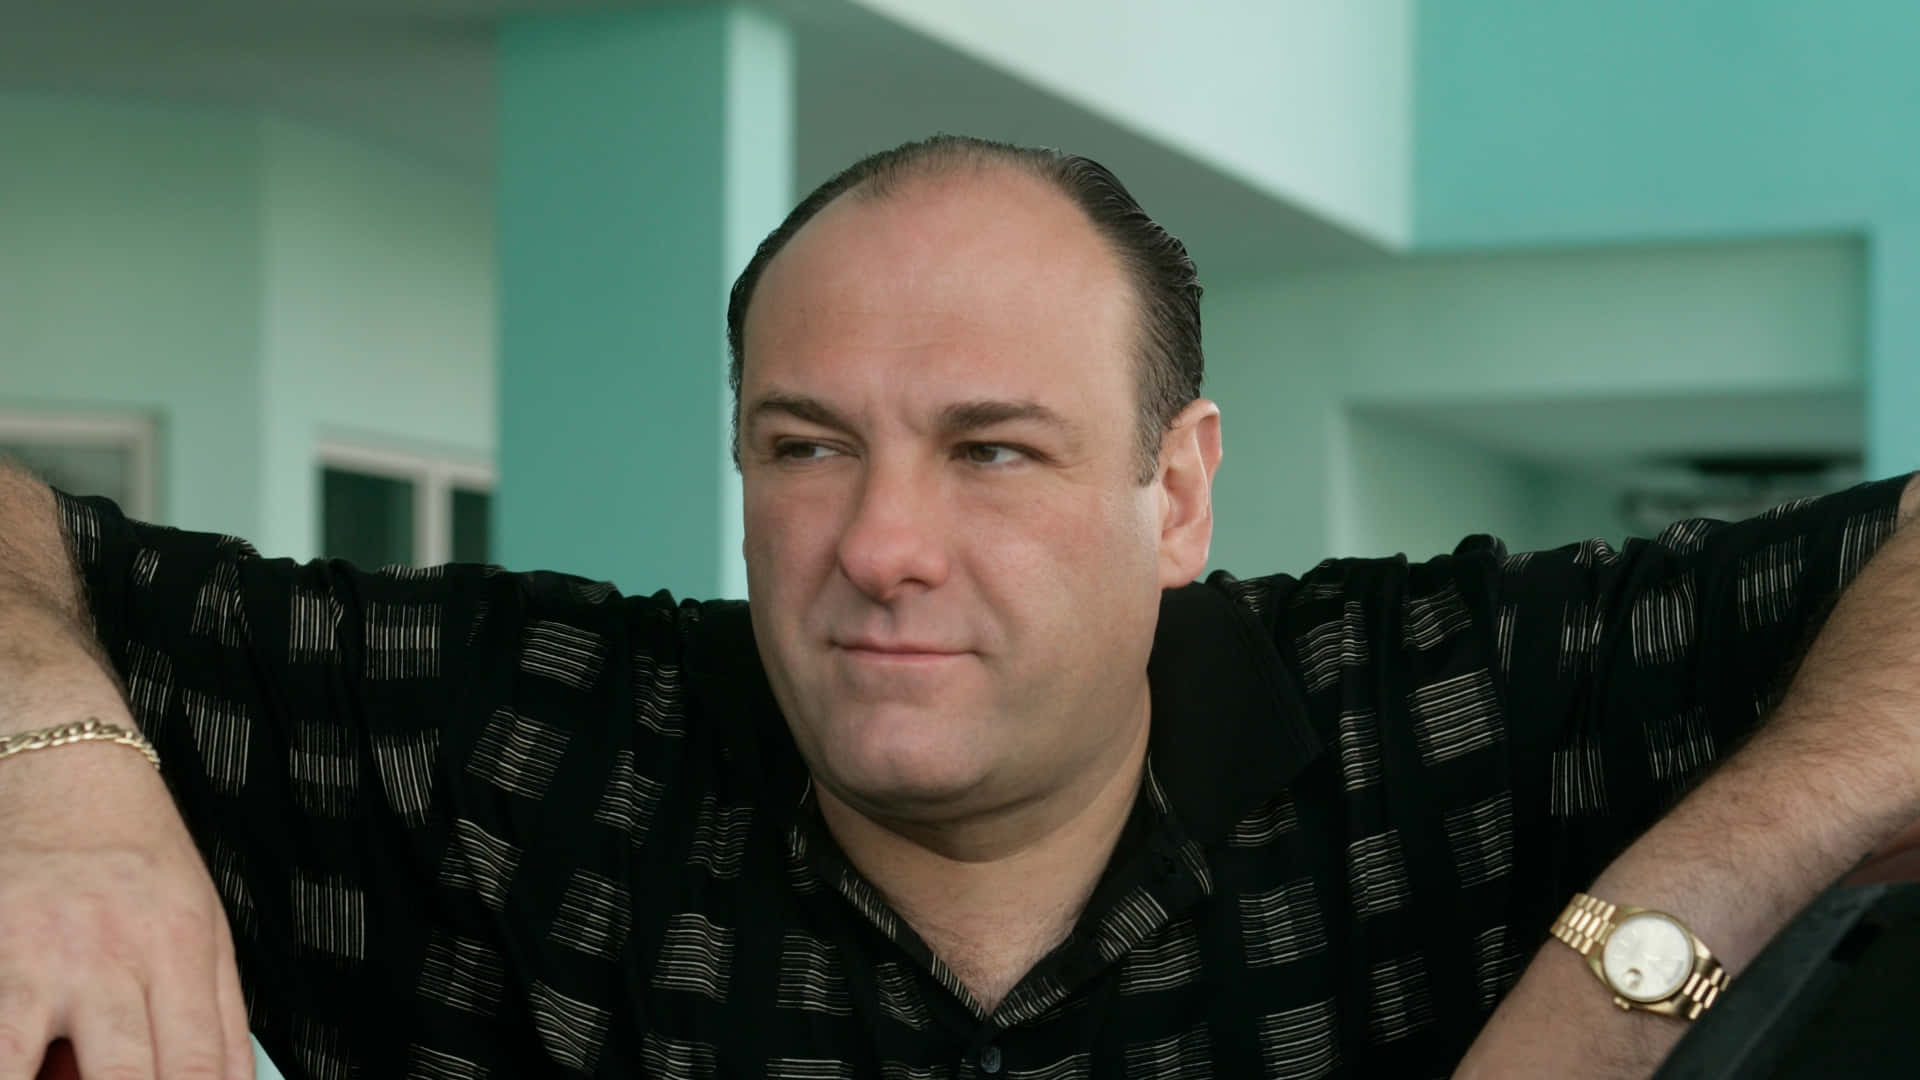 Jamesgandolfini Is An American Actor Renowned For His Role As Tony Soprano In The Tv Series 